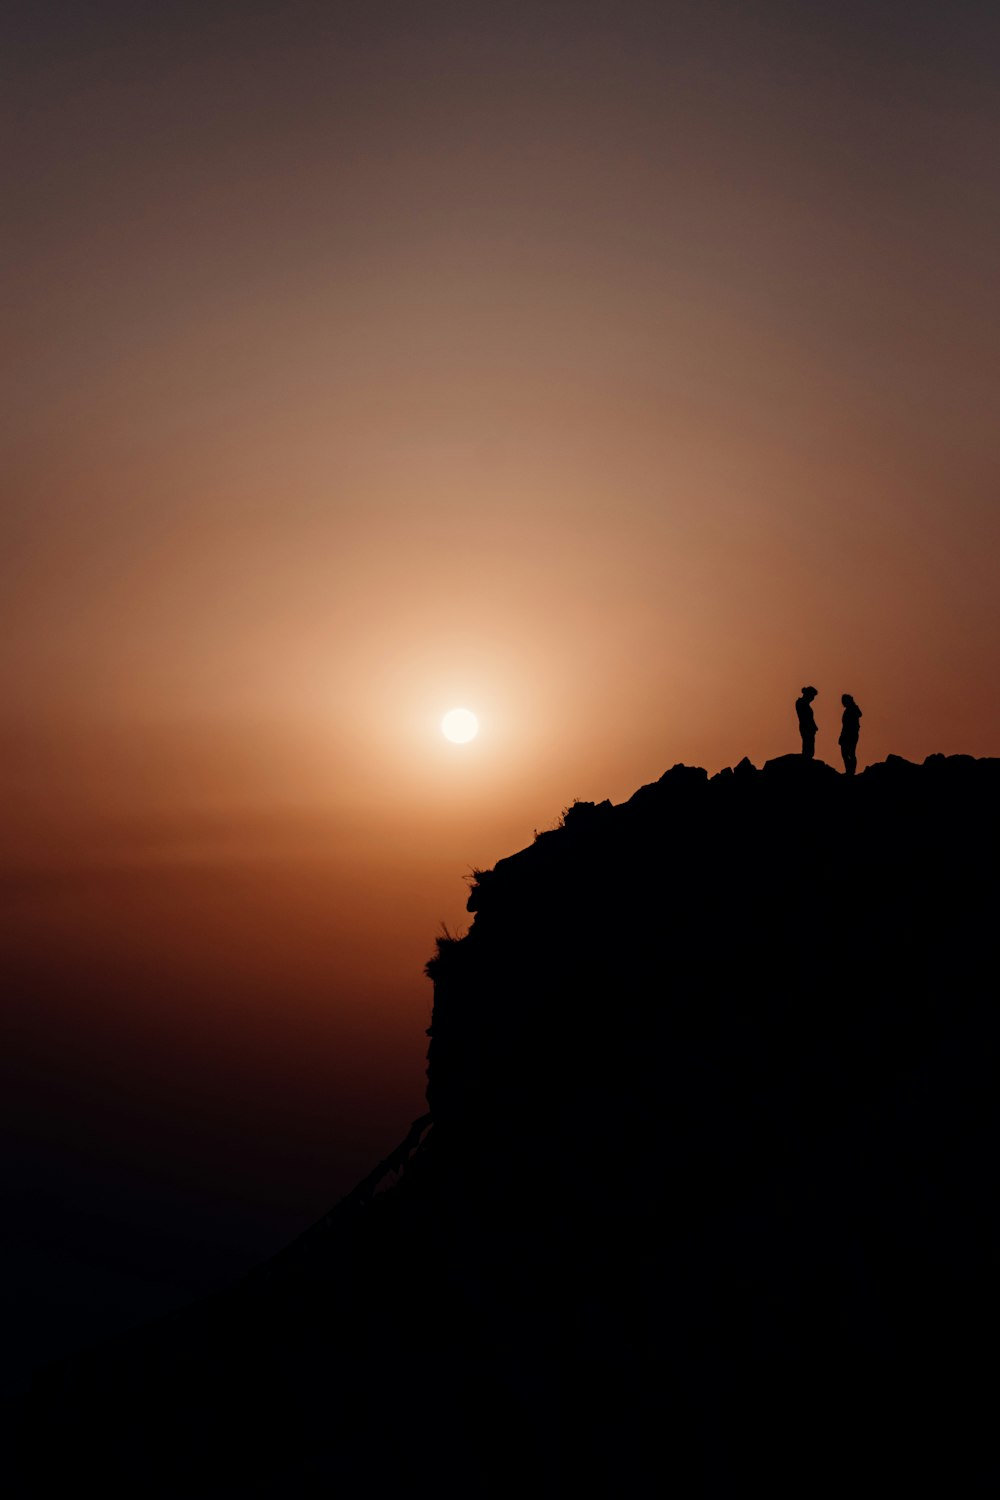 silhouette of 2 people standing on rock formation during sunset